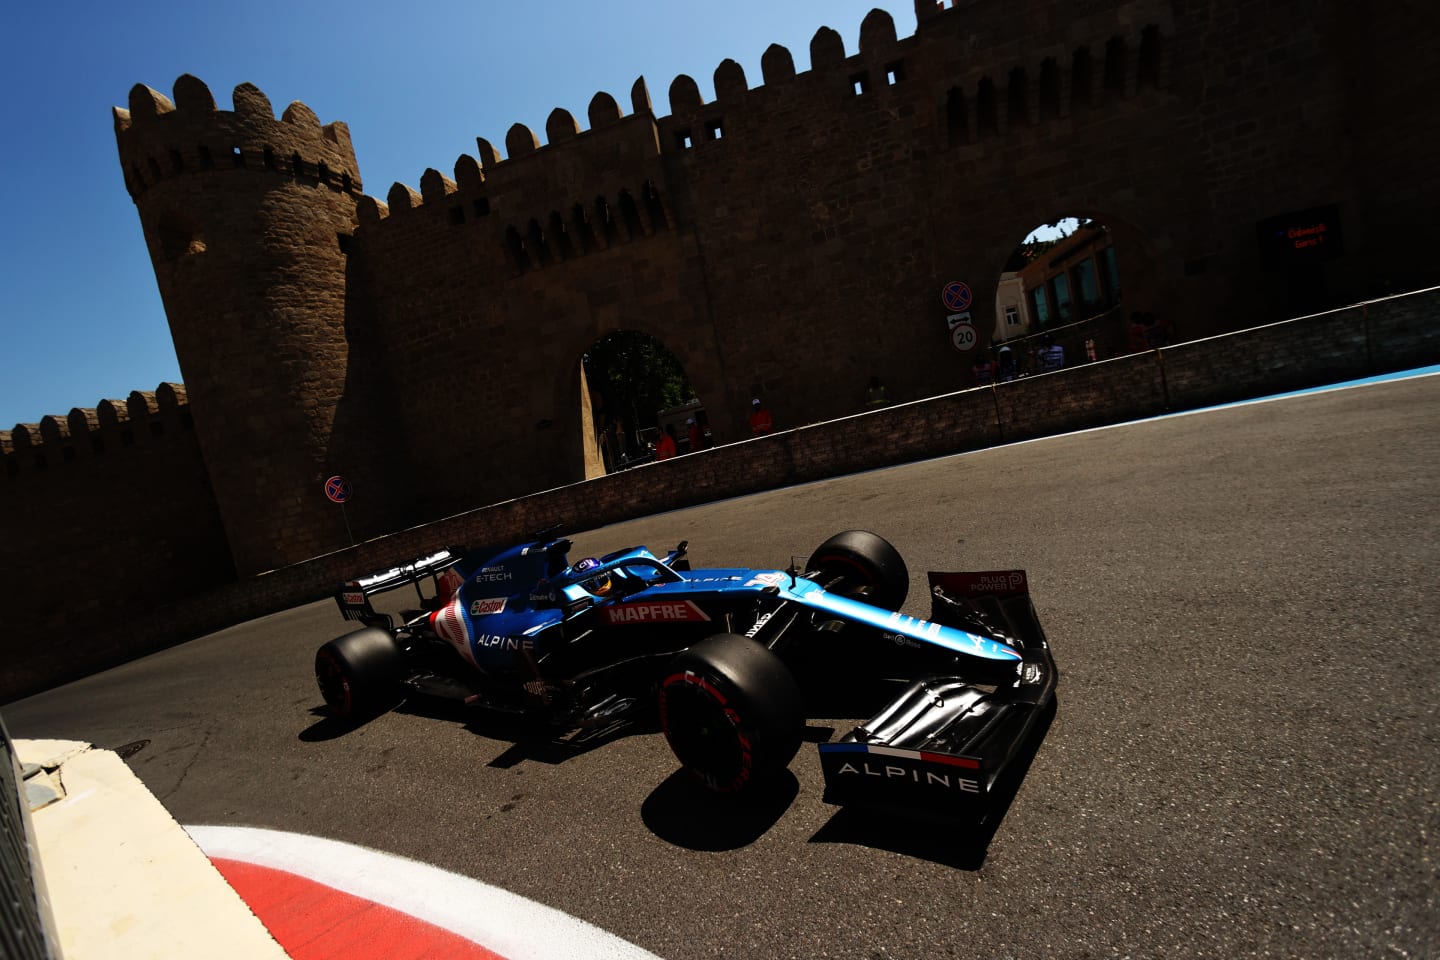 BAKU, AZERBAIJAN - JUNE 05: Fernando Alonso of Spain driving the (14) Alpine A521 Renault during final practice ahead of the F1 Grand Prix of Azerbaijan at Baku City Circuit on June 05, 2021 in Baku, Azerbaijan. (Photo by Clive Rose/Getty Images)